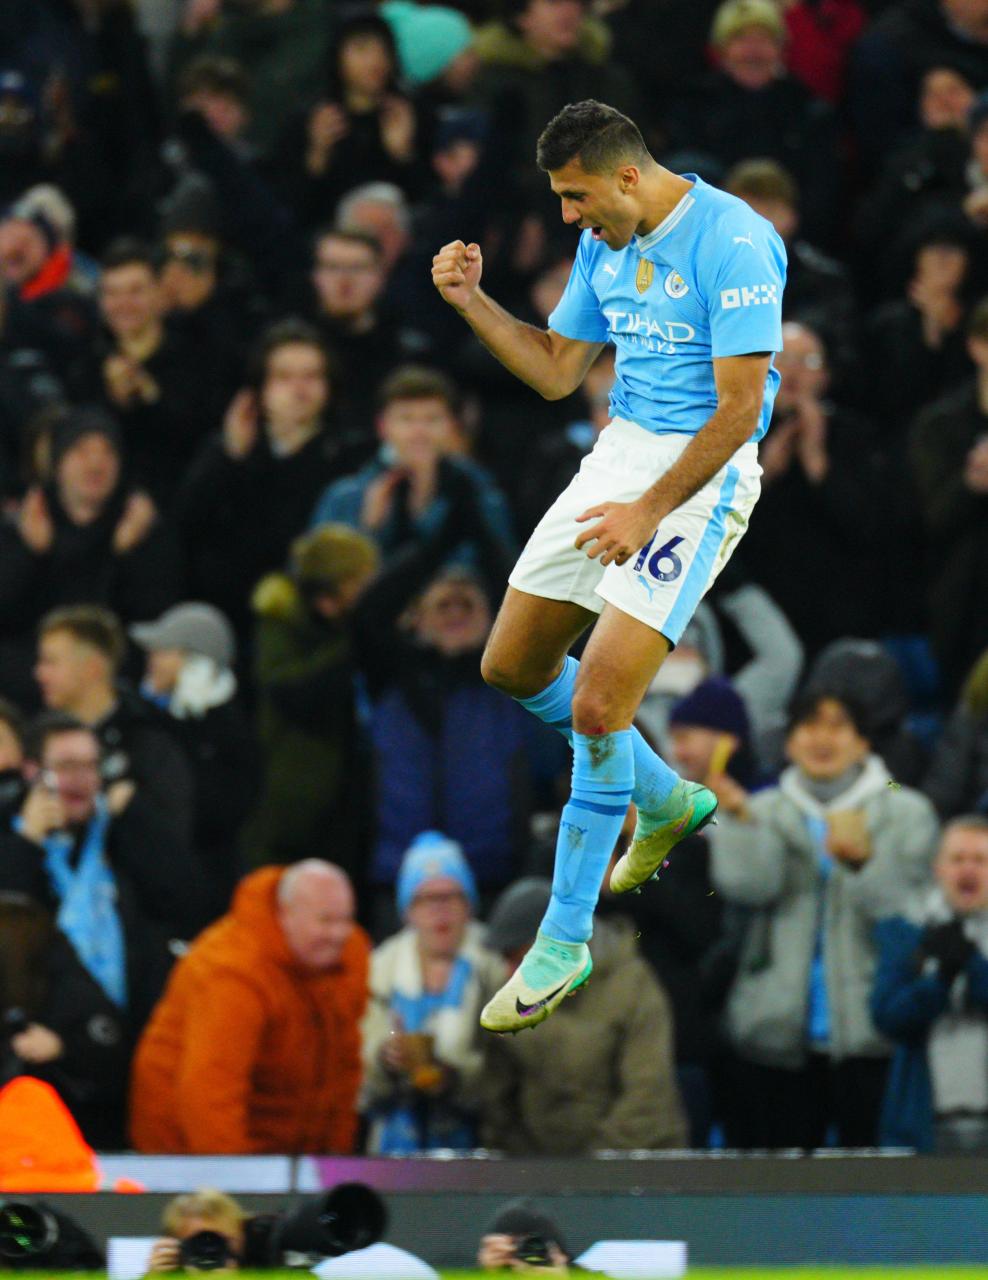 Rodri celebrated getting City's third just after half-time